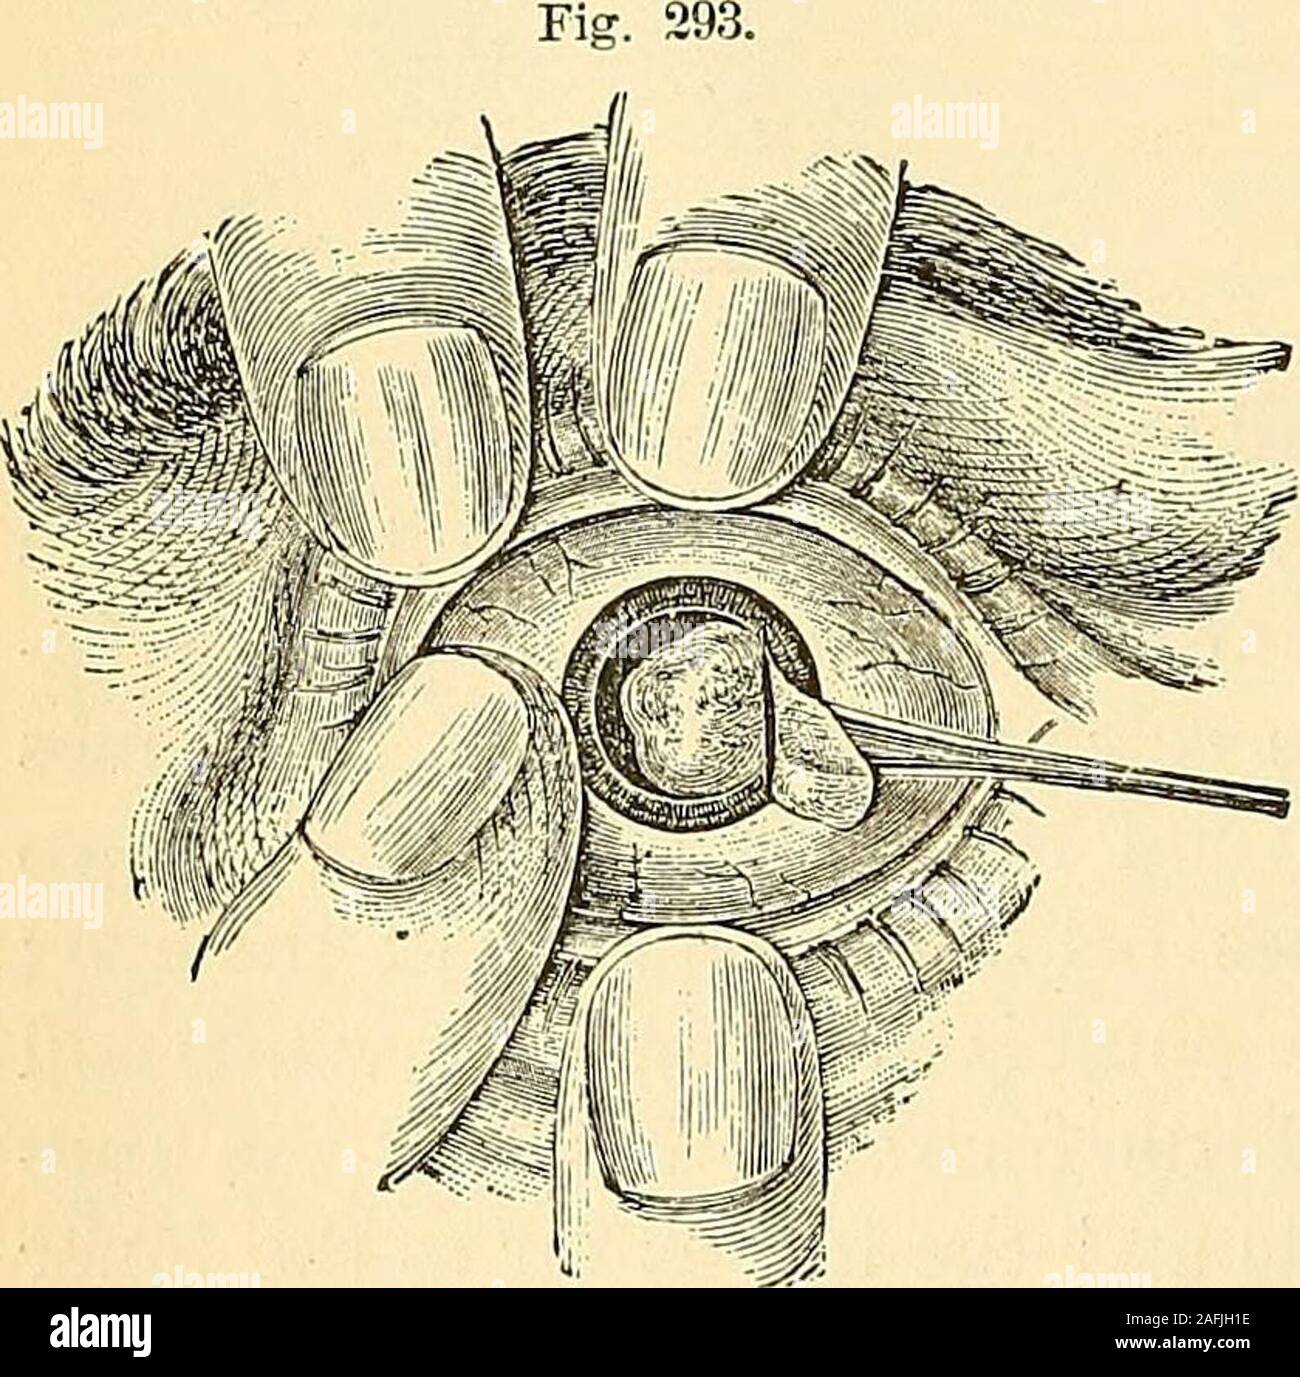 . The principles and practice of surgery. made two linesin length, and then slowly with-drawn, while the aqueous humorescapes. A curved needle is nowintroduced and the capsule cut;when, if the lens does not presentitself spontaneously, slight pressureupon the opposite side of the ball will generally succeed in effecting-itsextrusion. In some cases it will be necessary to facilitate the escape of a pulpycataract, by making the corneal wound more patulous by pressure uponits posterior margin with a Daviels spoon, as represented in the wood-cut. Finally, if these measures fail, the lids must be c Stock Photo